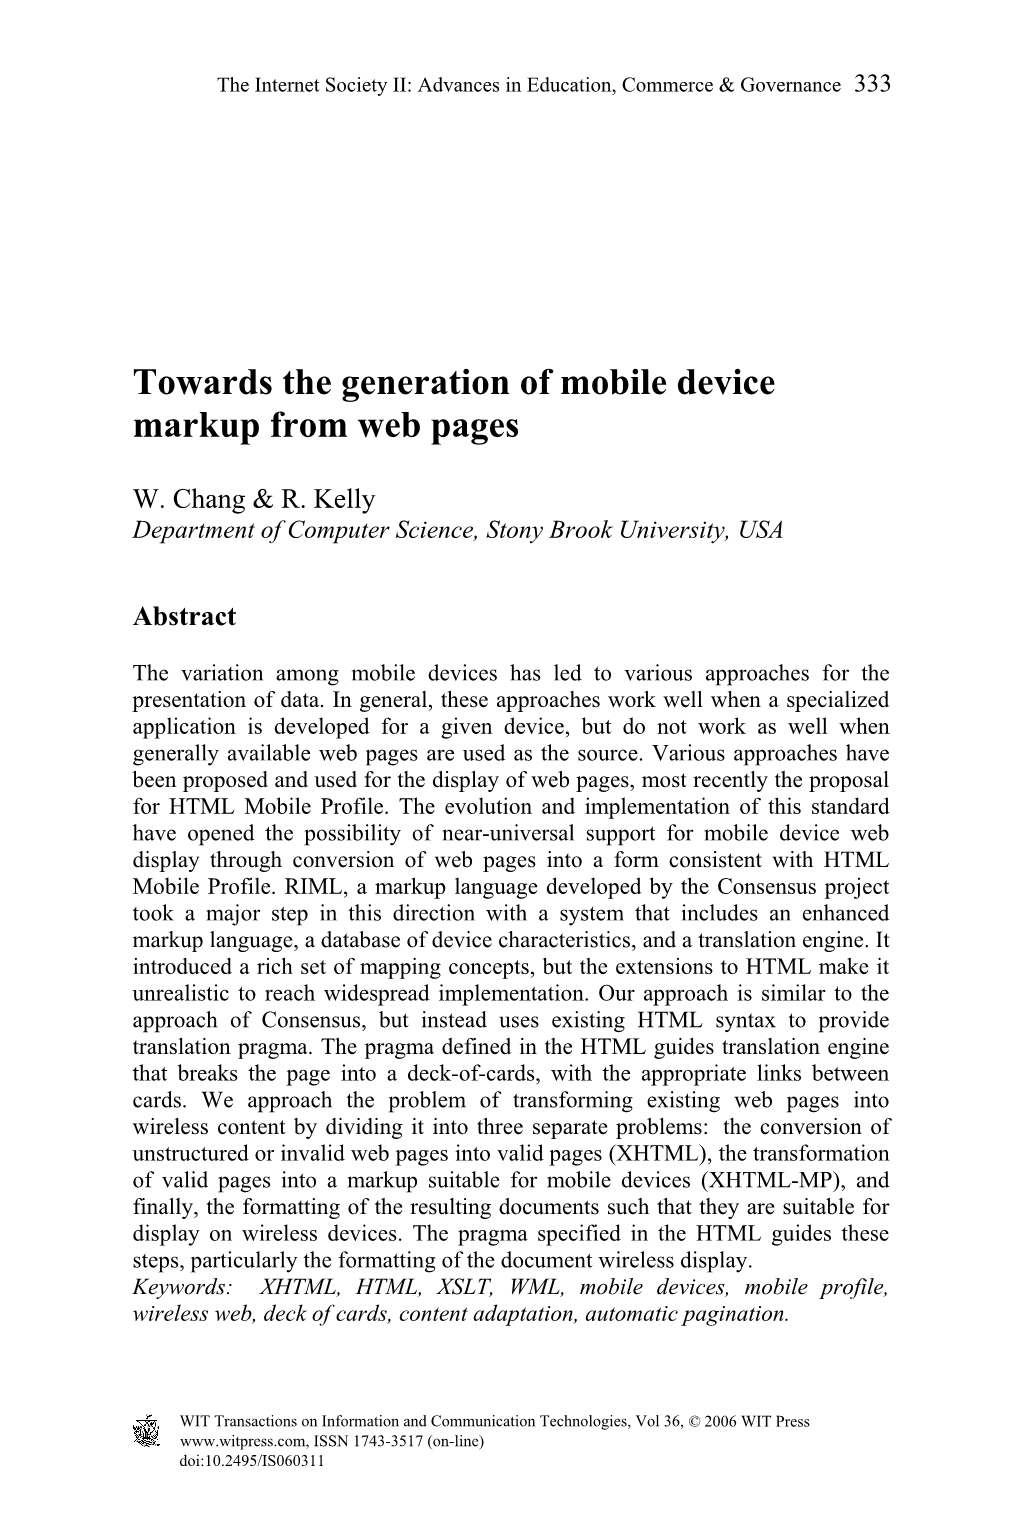 Towards the Generation of Mobile Device Markup from Web Pages